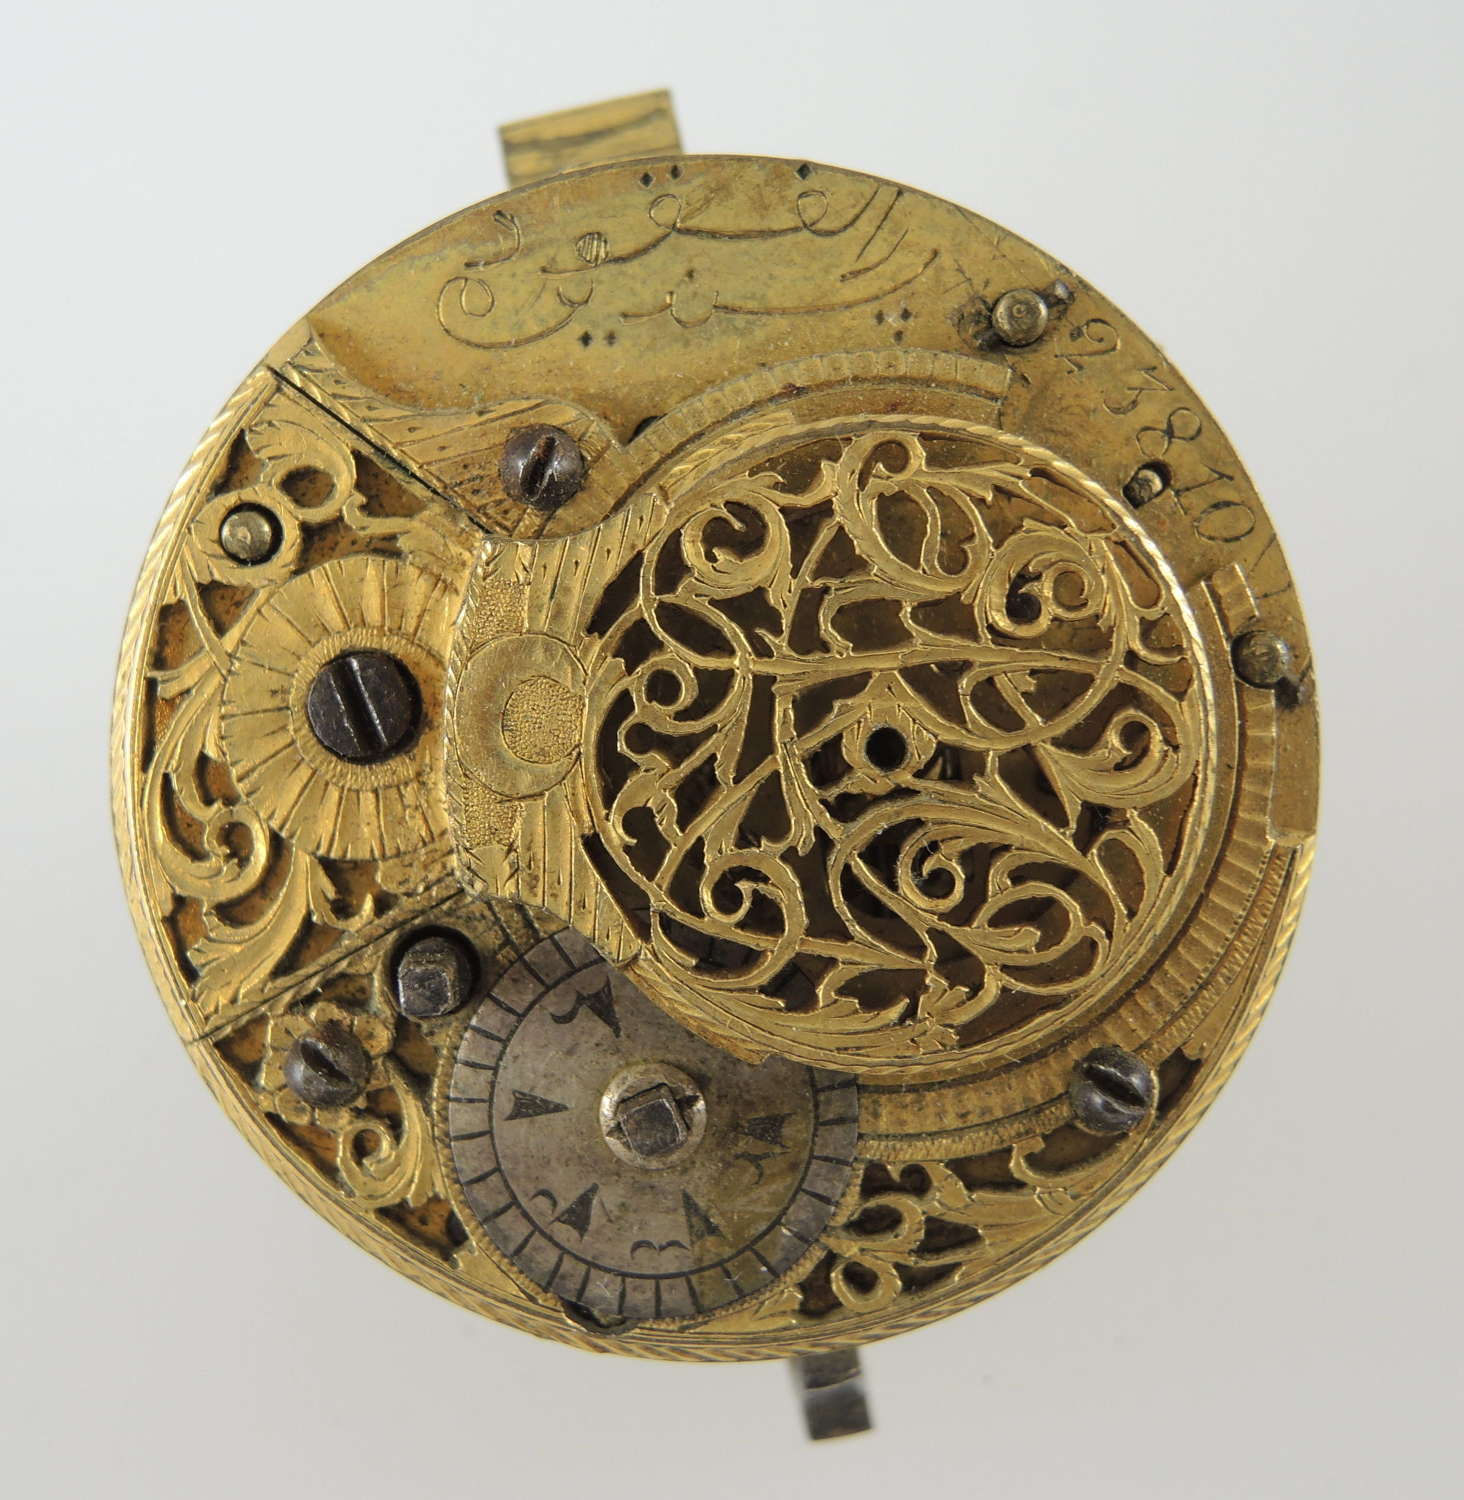 English verge fusee movement made for the Turkish market c1800